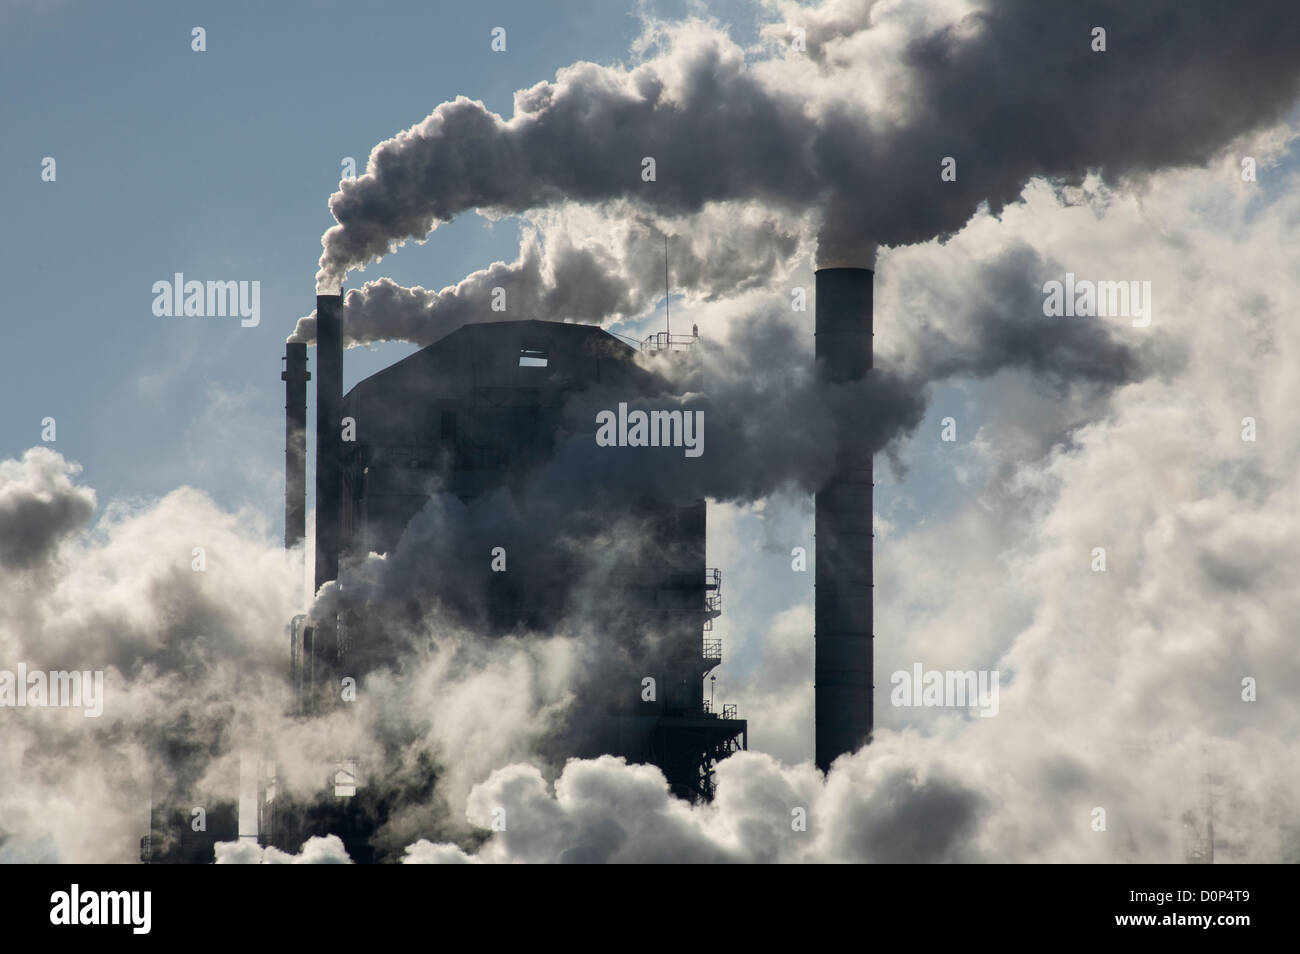 GA00133-00...GEORGIA - Smoke and steam from smoke stacks at a fibers factory in the town of Jesup. Stock Photo